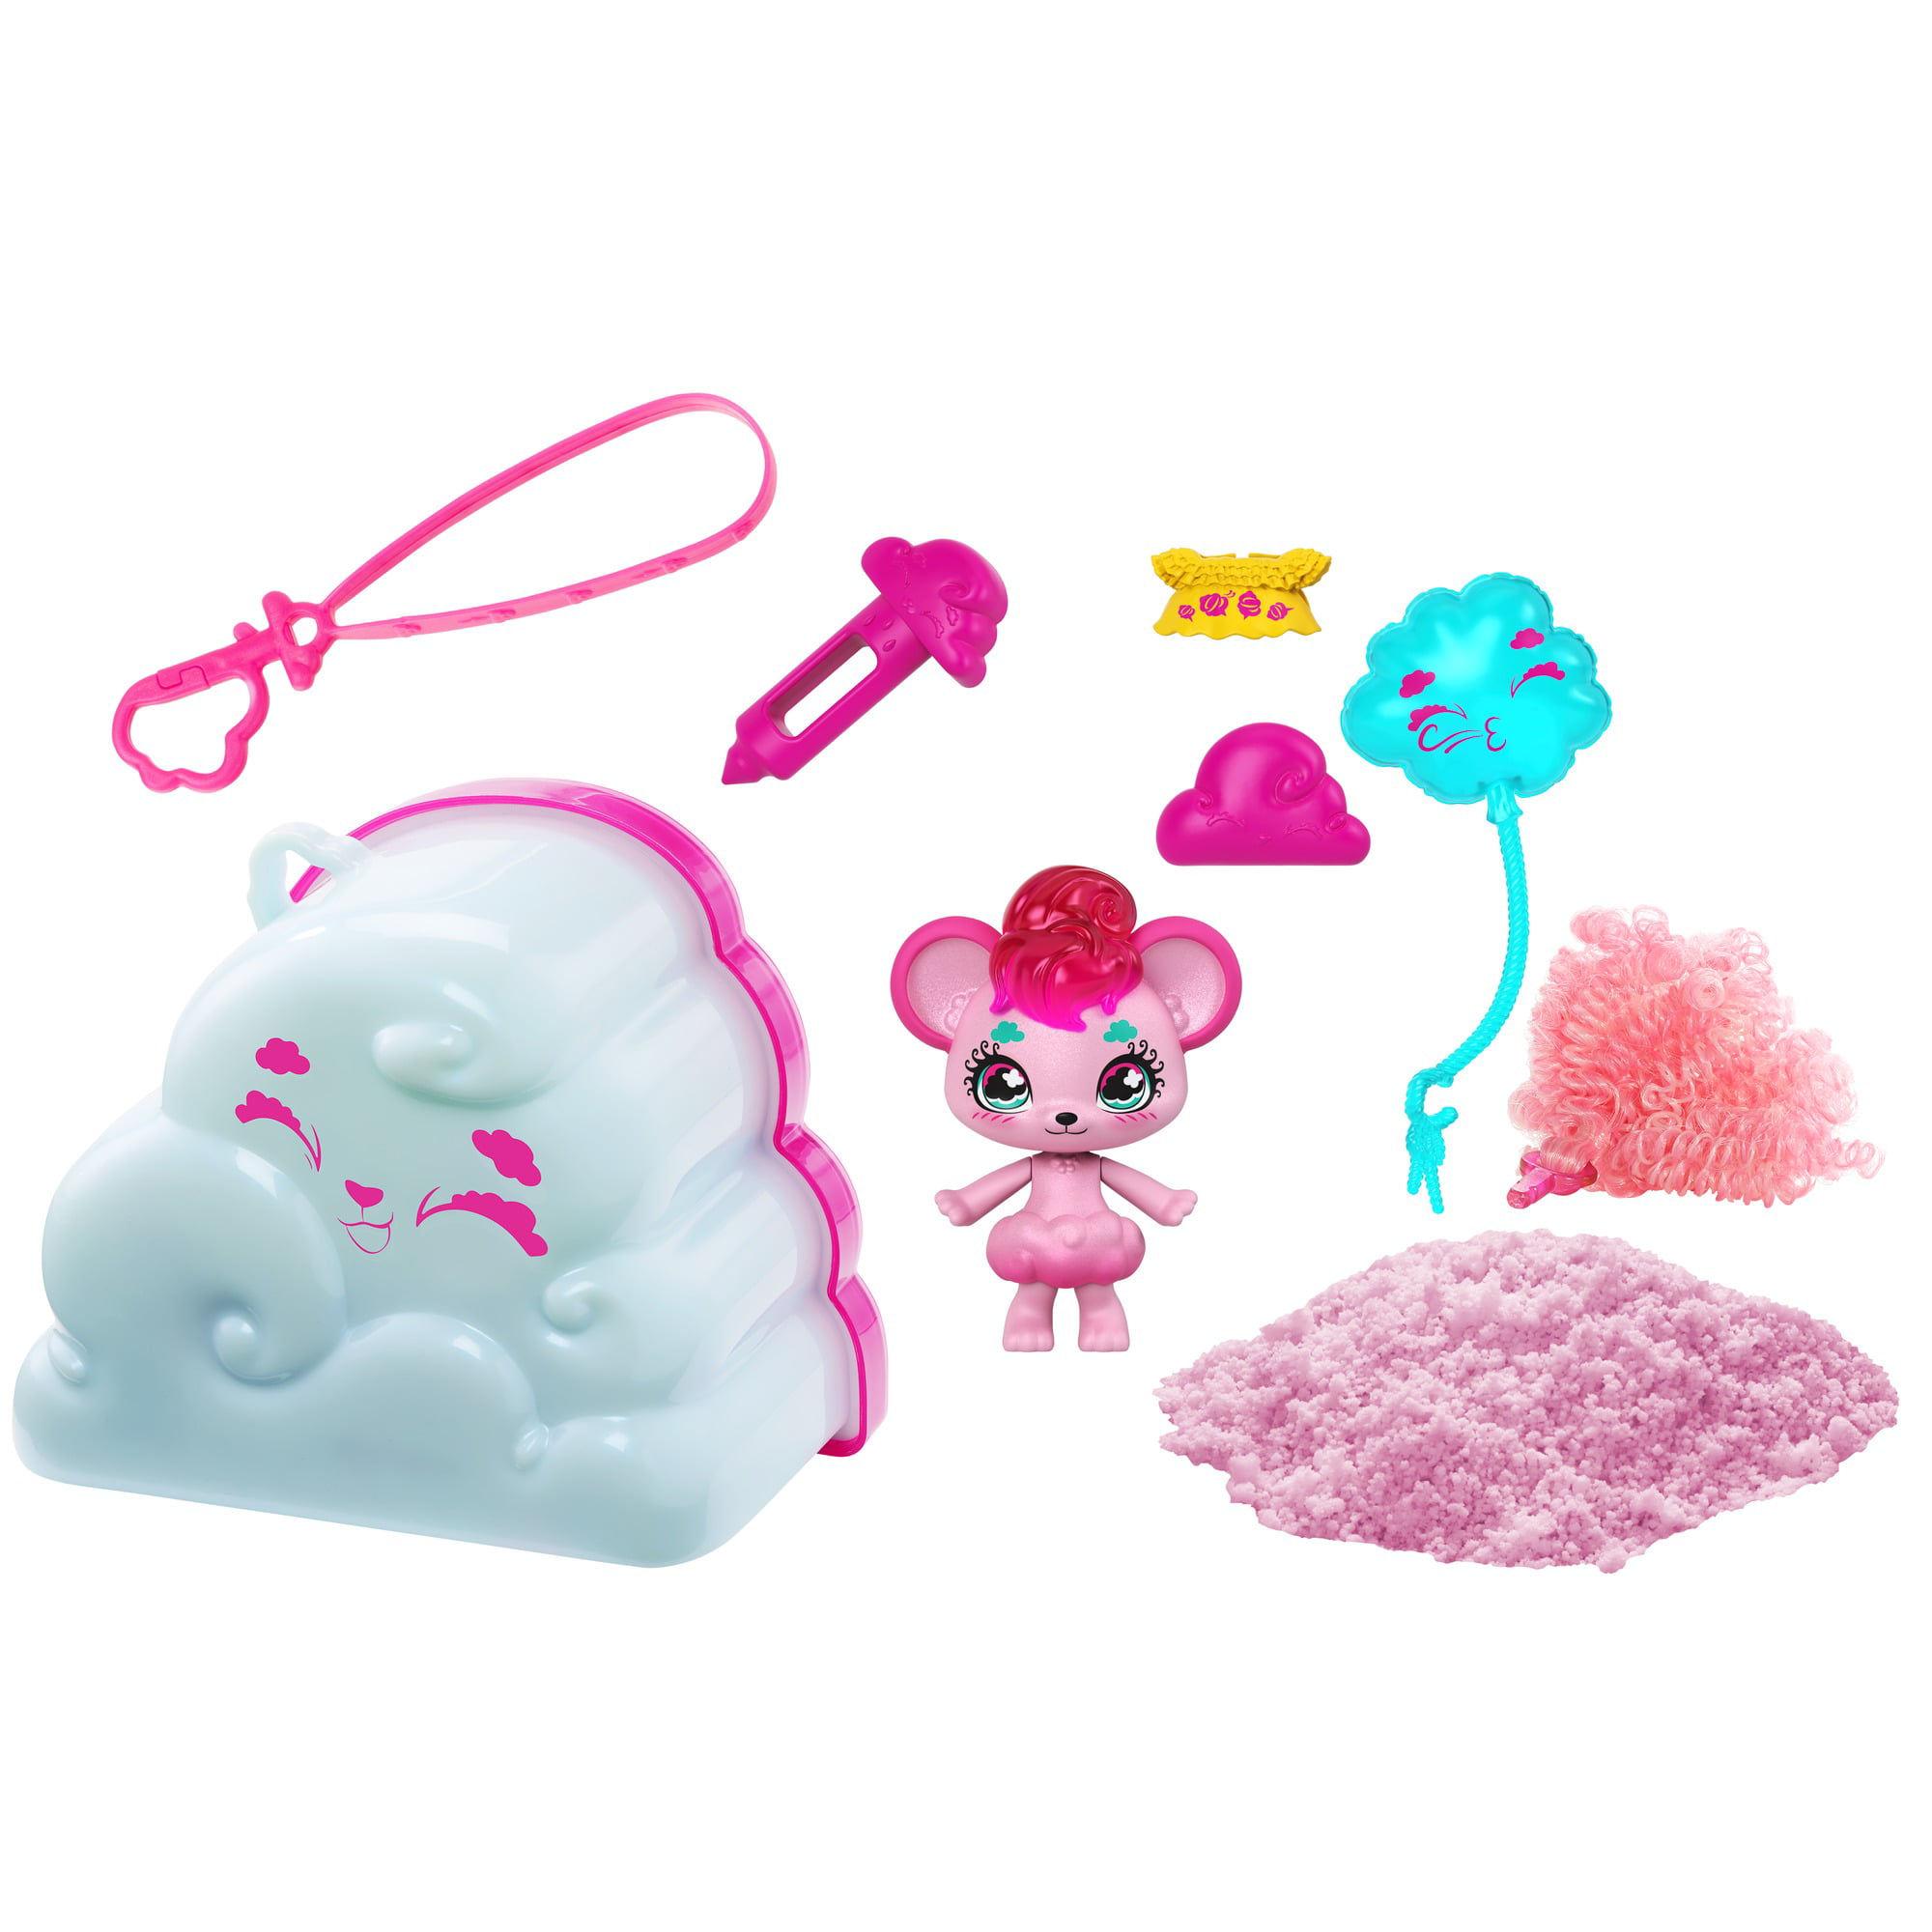 Mattel Cloudees Cloud Themed Reveal Toy Hidden Figure Small Pet Collectible Gnc9 for sale online